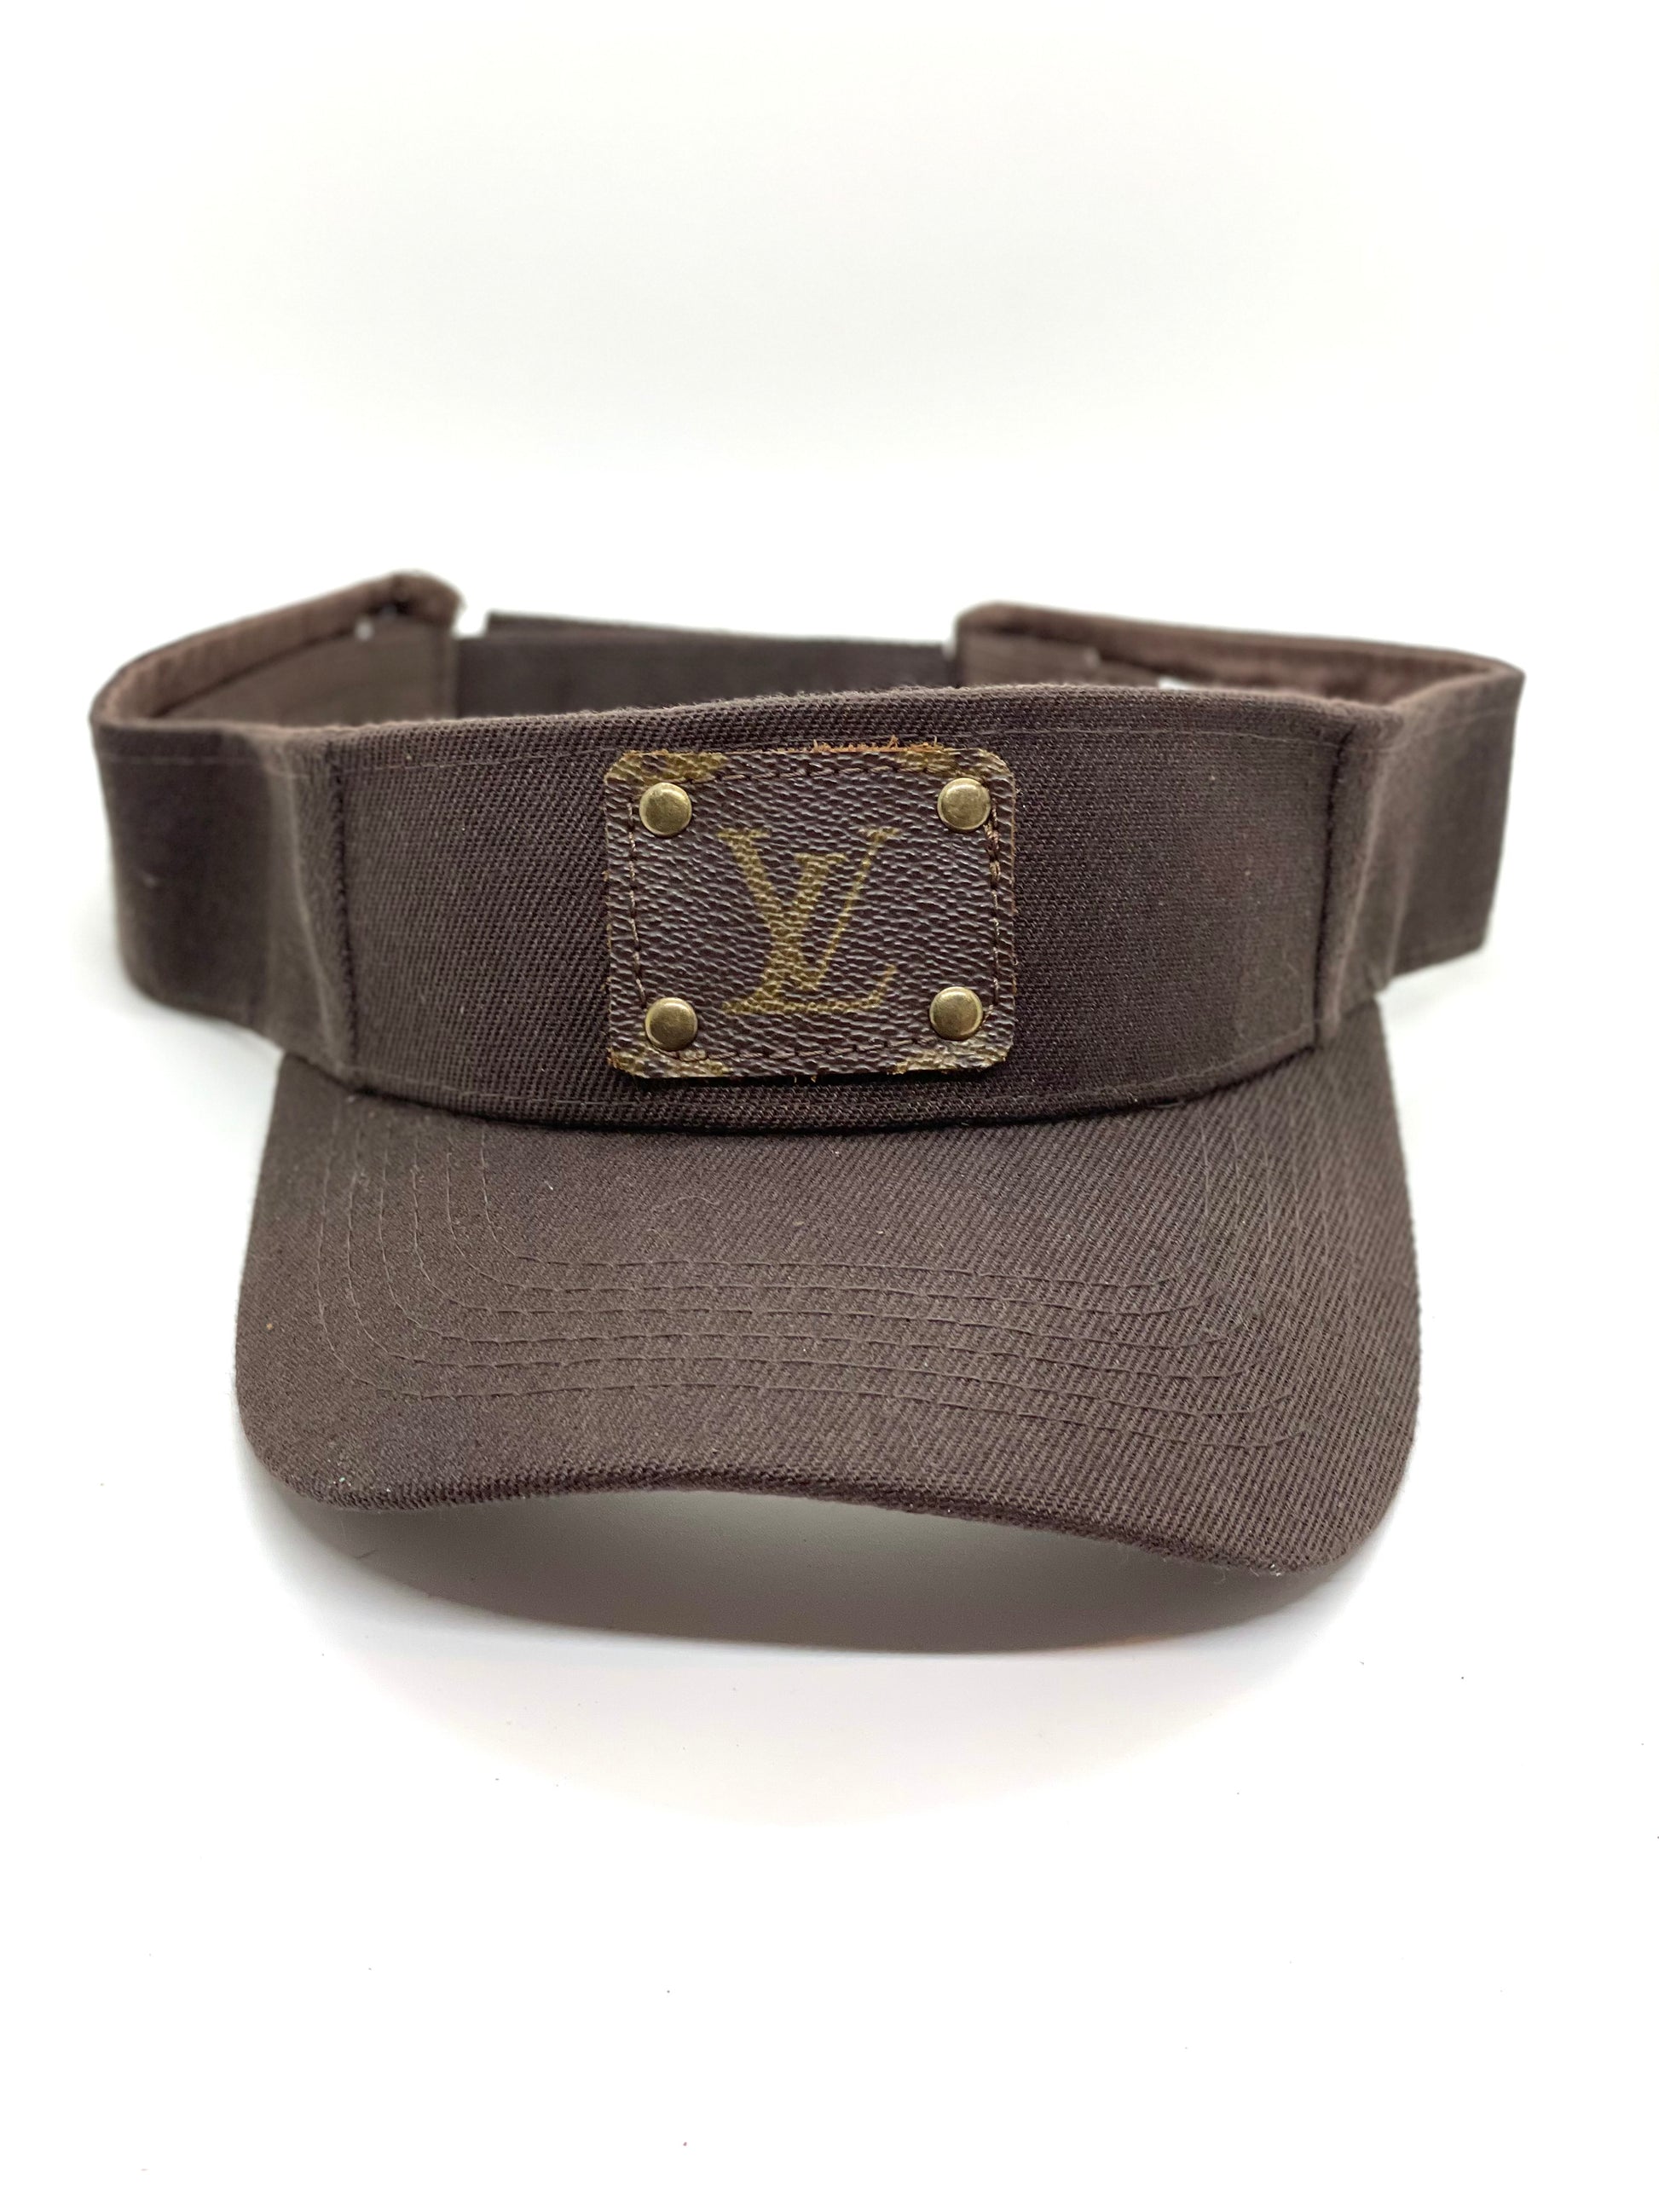 ZZ6 - Brown Visor Antique Hardware - Patches Of Upcycling